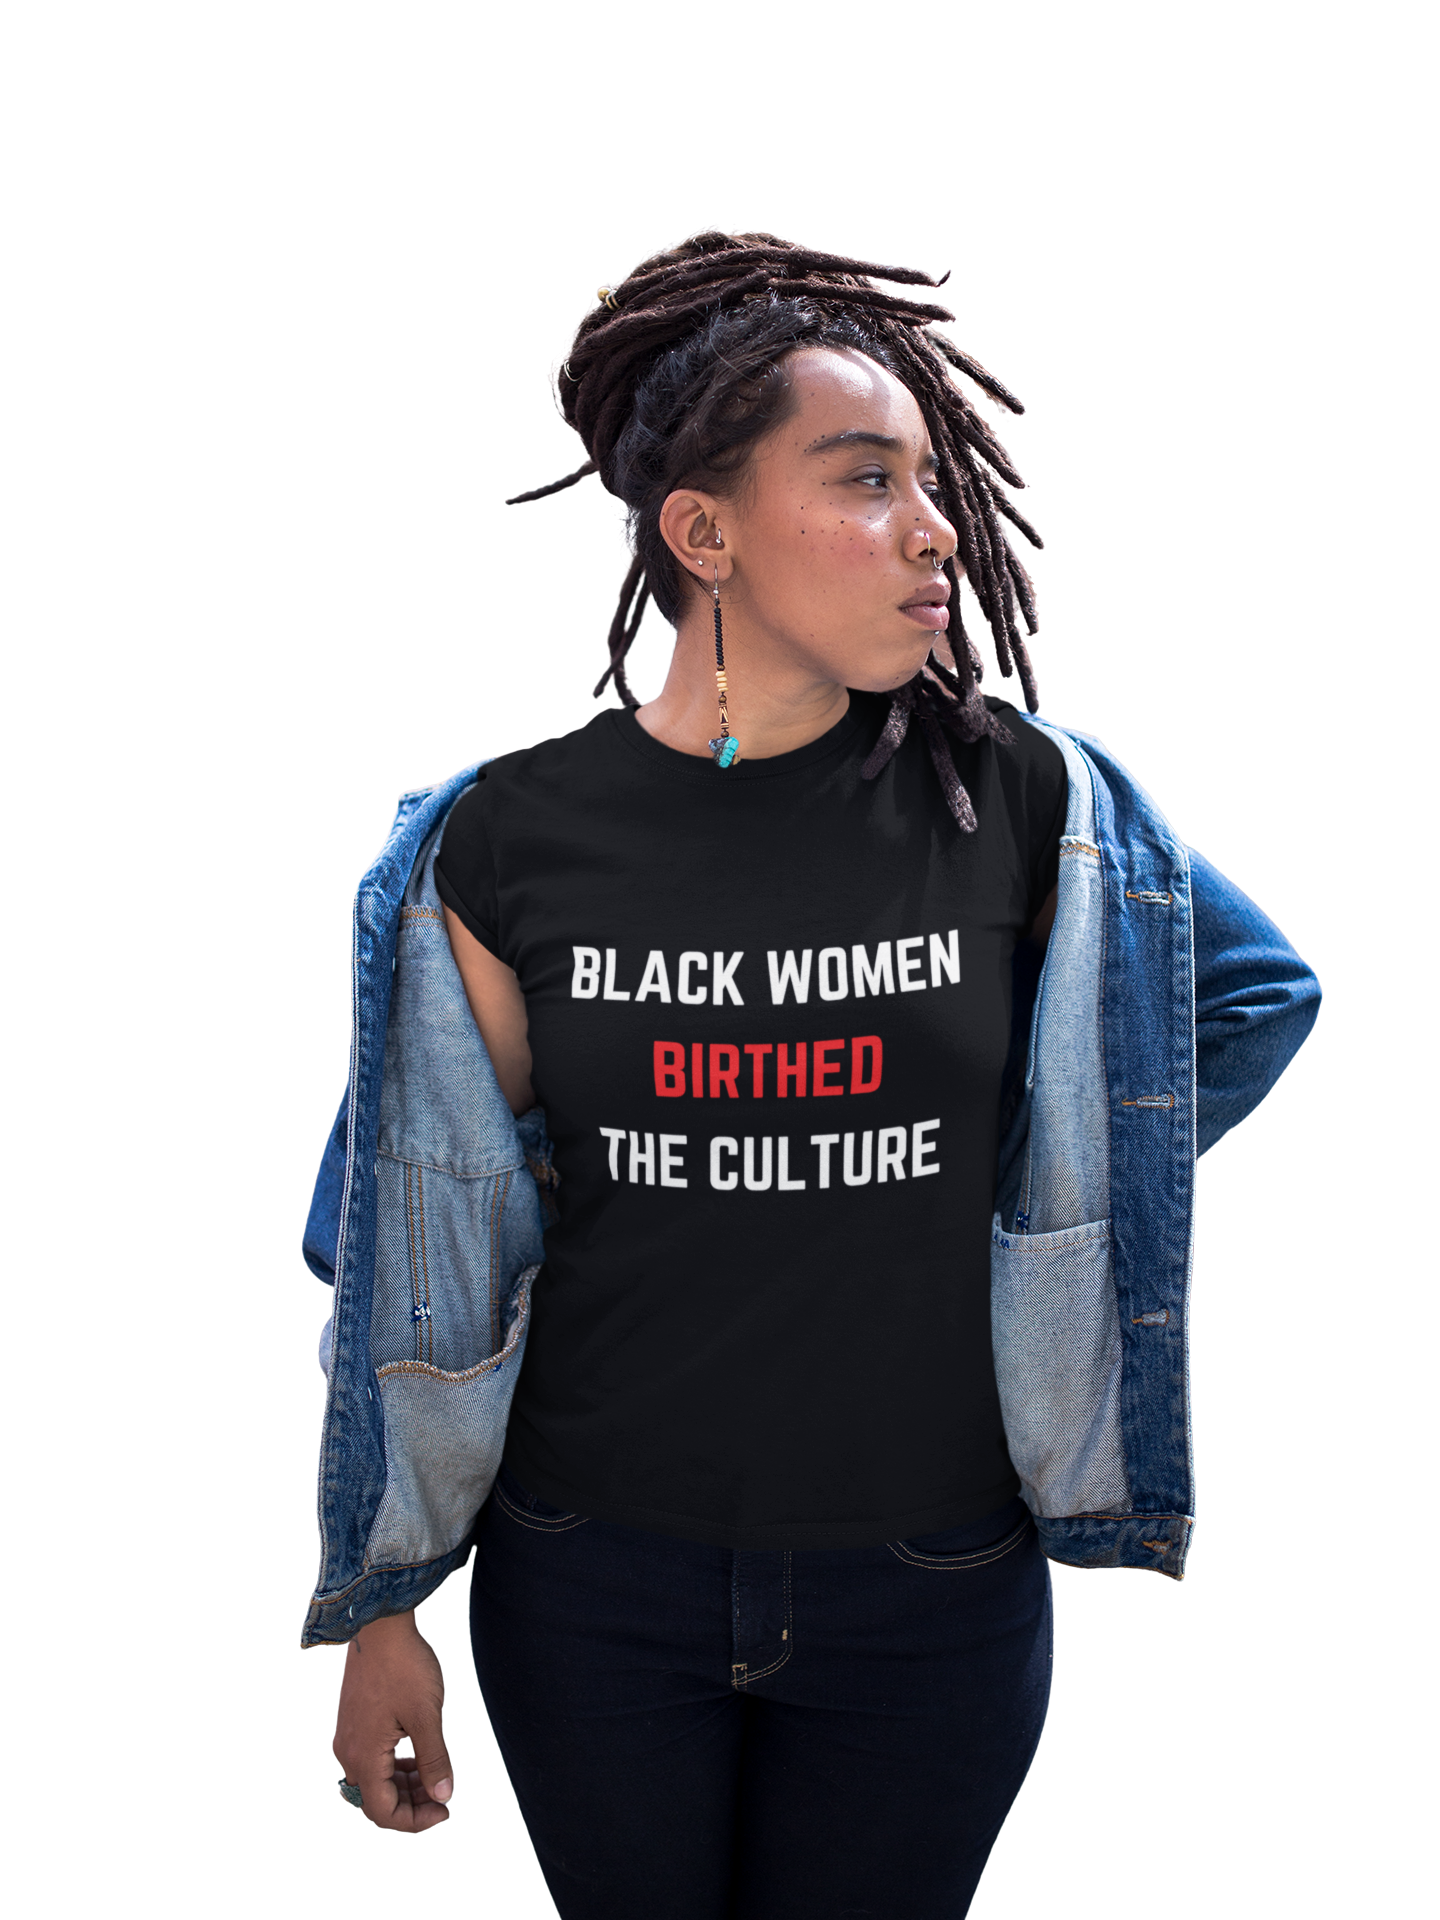 Women's "Black Women Birthed The Culture" T-Shirts